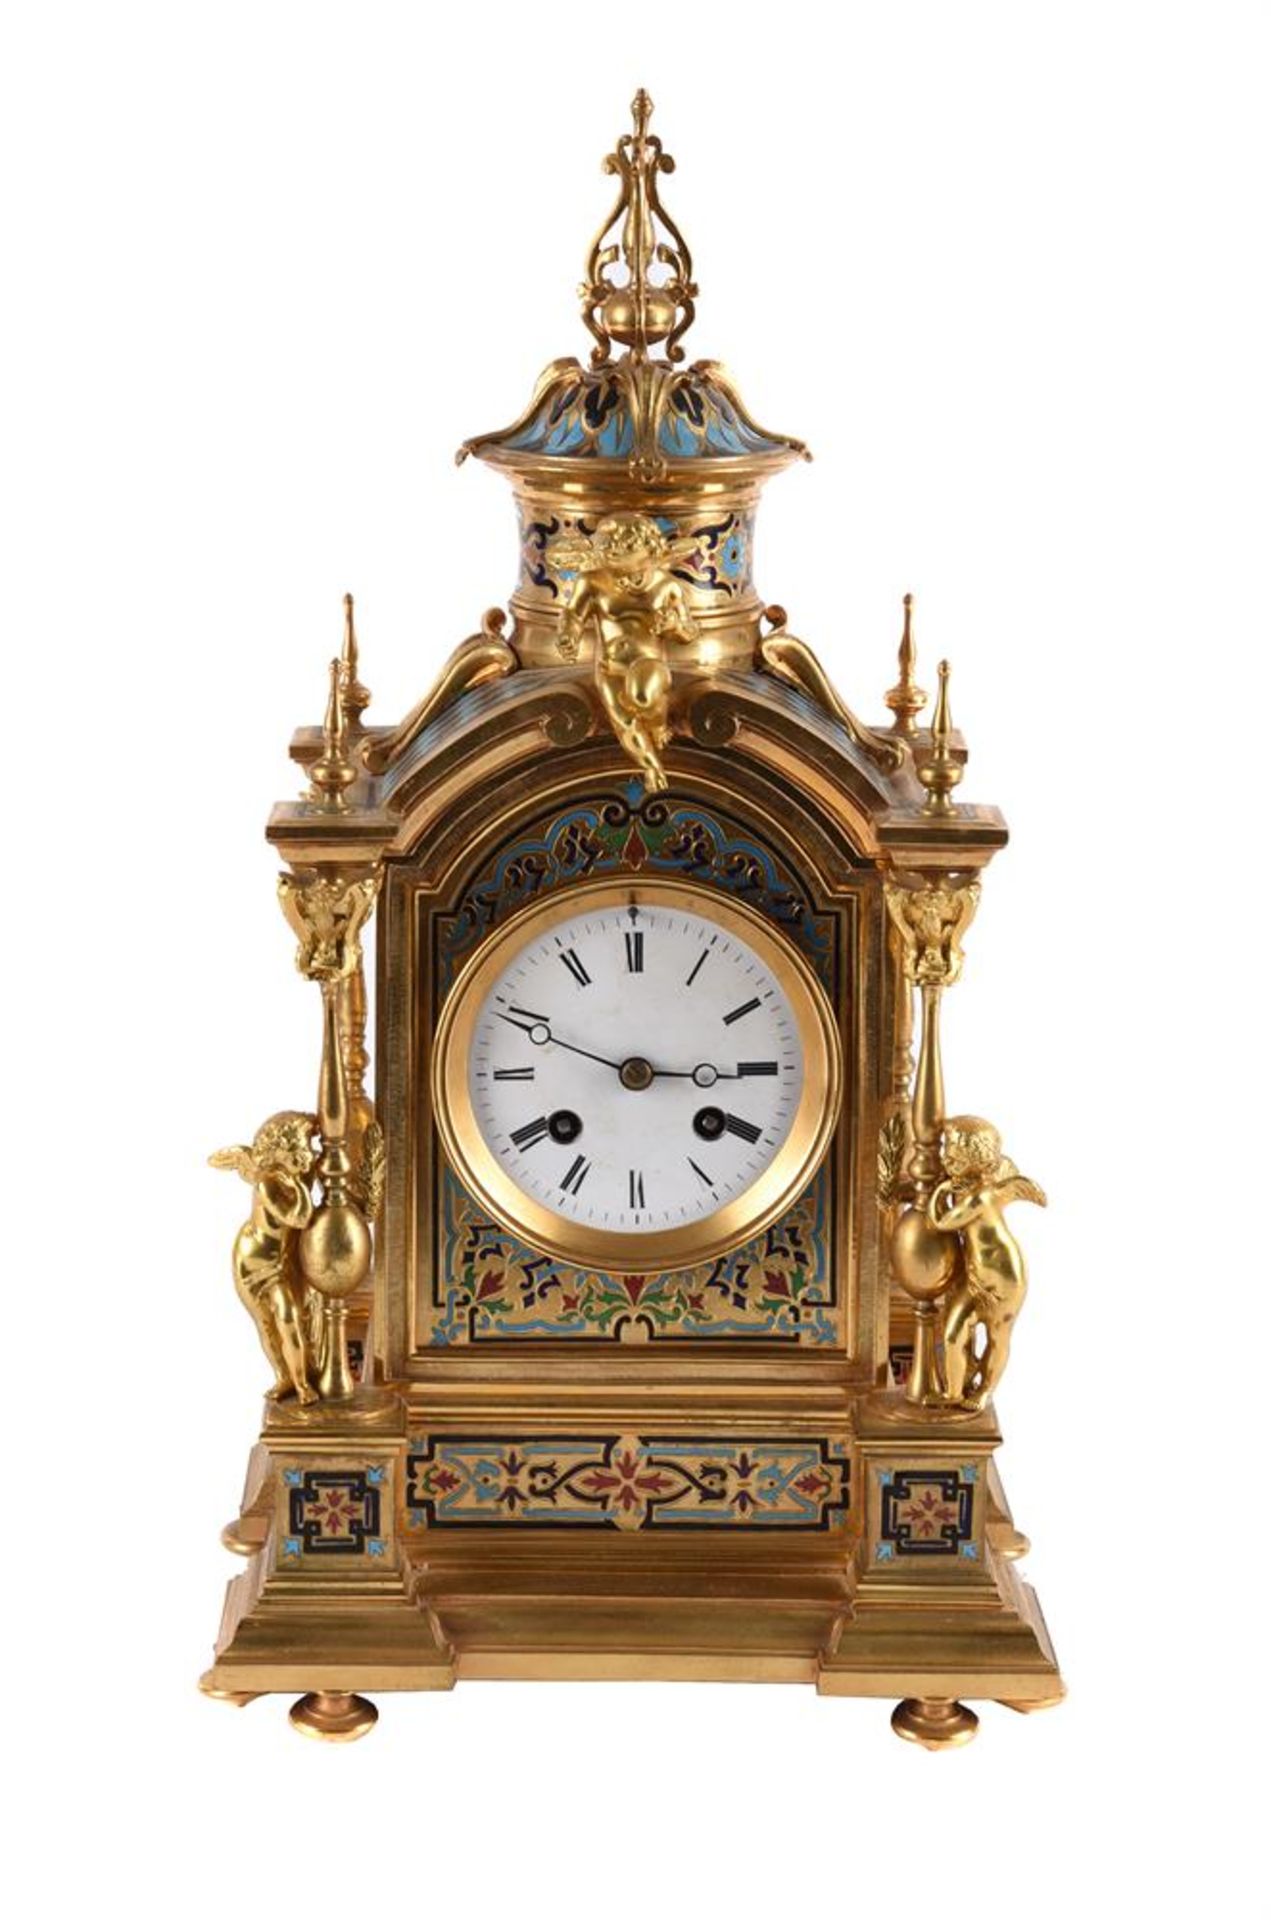 A FRENCH GILT METAL AND CHAMPLEVE ENAMEL MANTEL CLOCK, LATE 19TH CENTURY